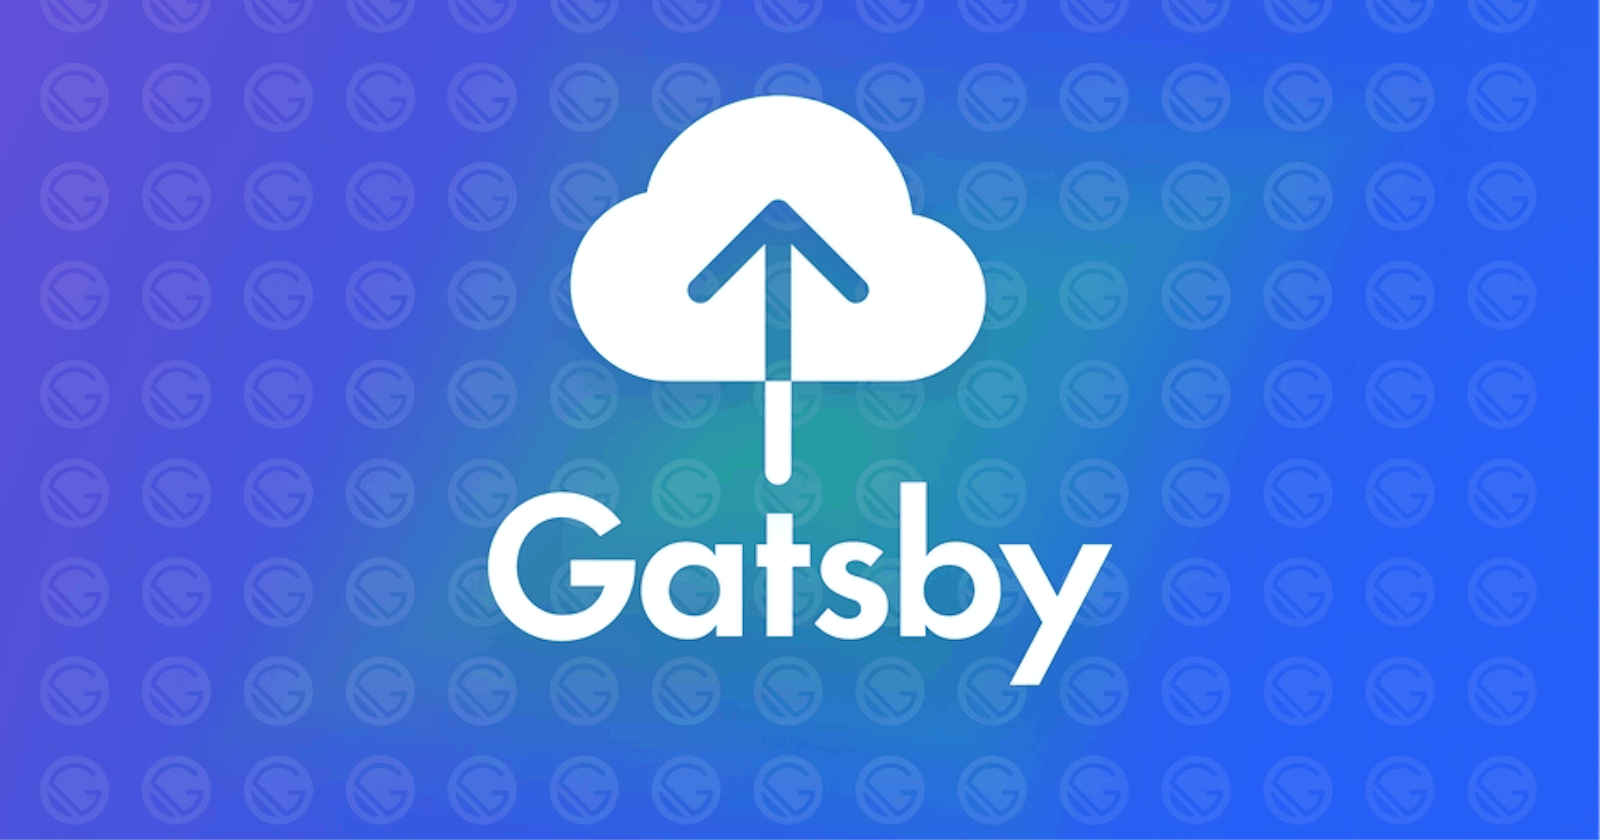 Content Management Systems for Gatsby